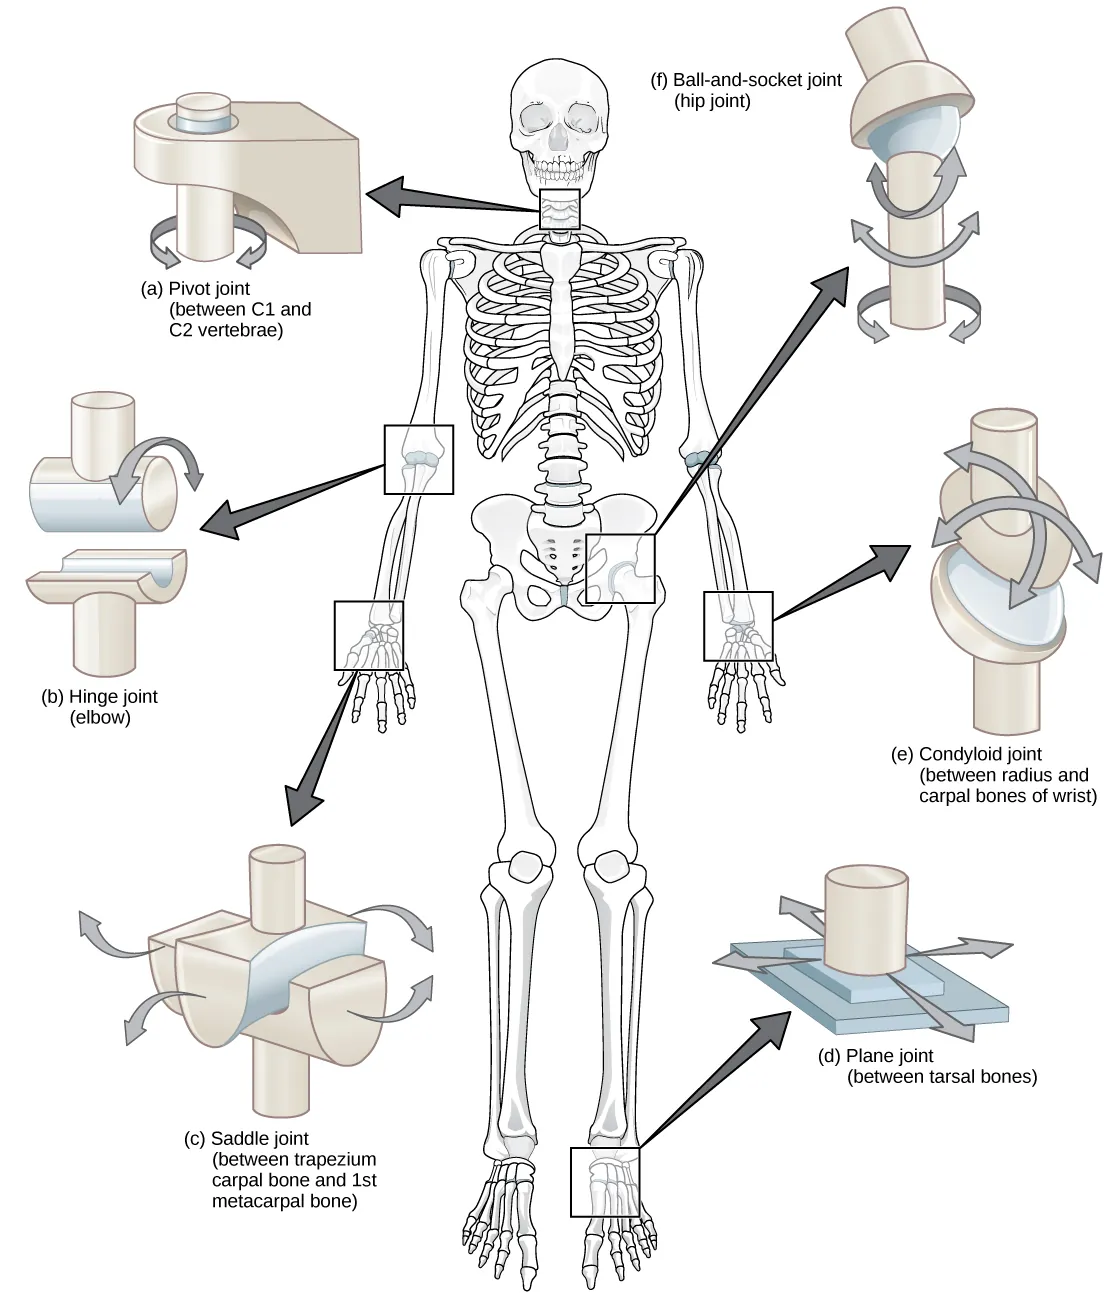  Illustration shows joints of the body. The neck is a pivot joint that allows rotation. The hip is a ball-and-socket joint that allows a swiveling movement. The elbow is a hinge joint that allows movement in one direction. The wrist has a saddle joint to allow back-and forth-movement, and a condyloid joint to allow up-and-down movement. The tarsals of the foot have a plane joint that allows back-and-forth movement.